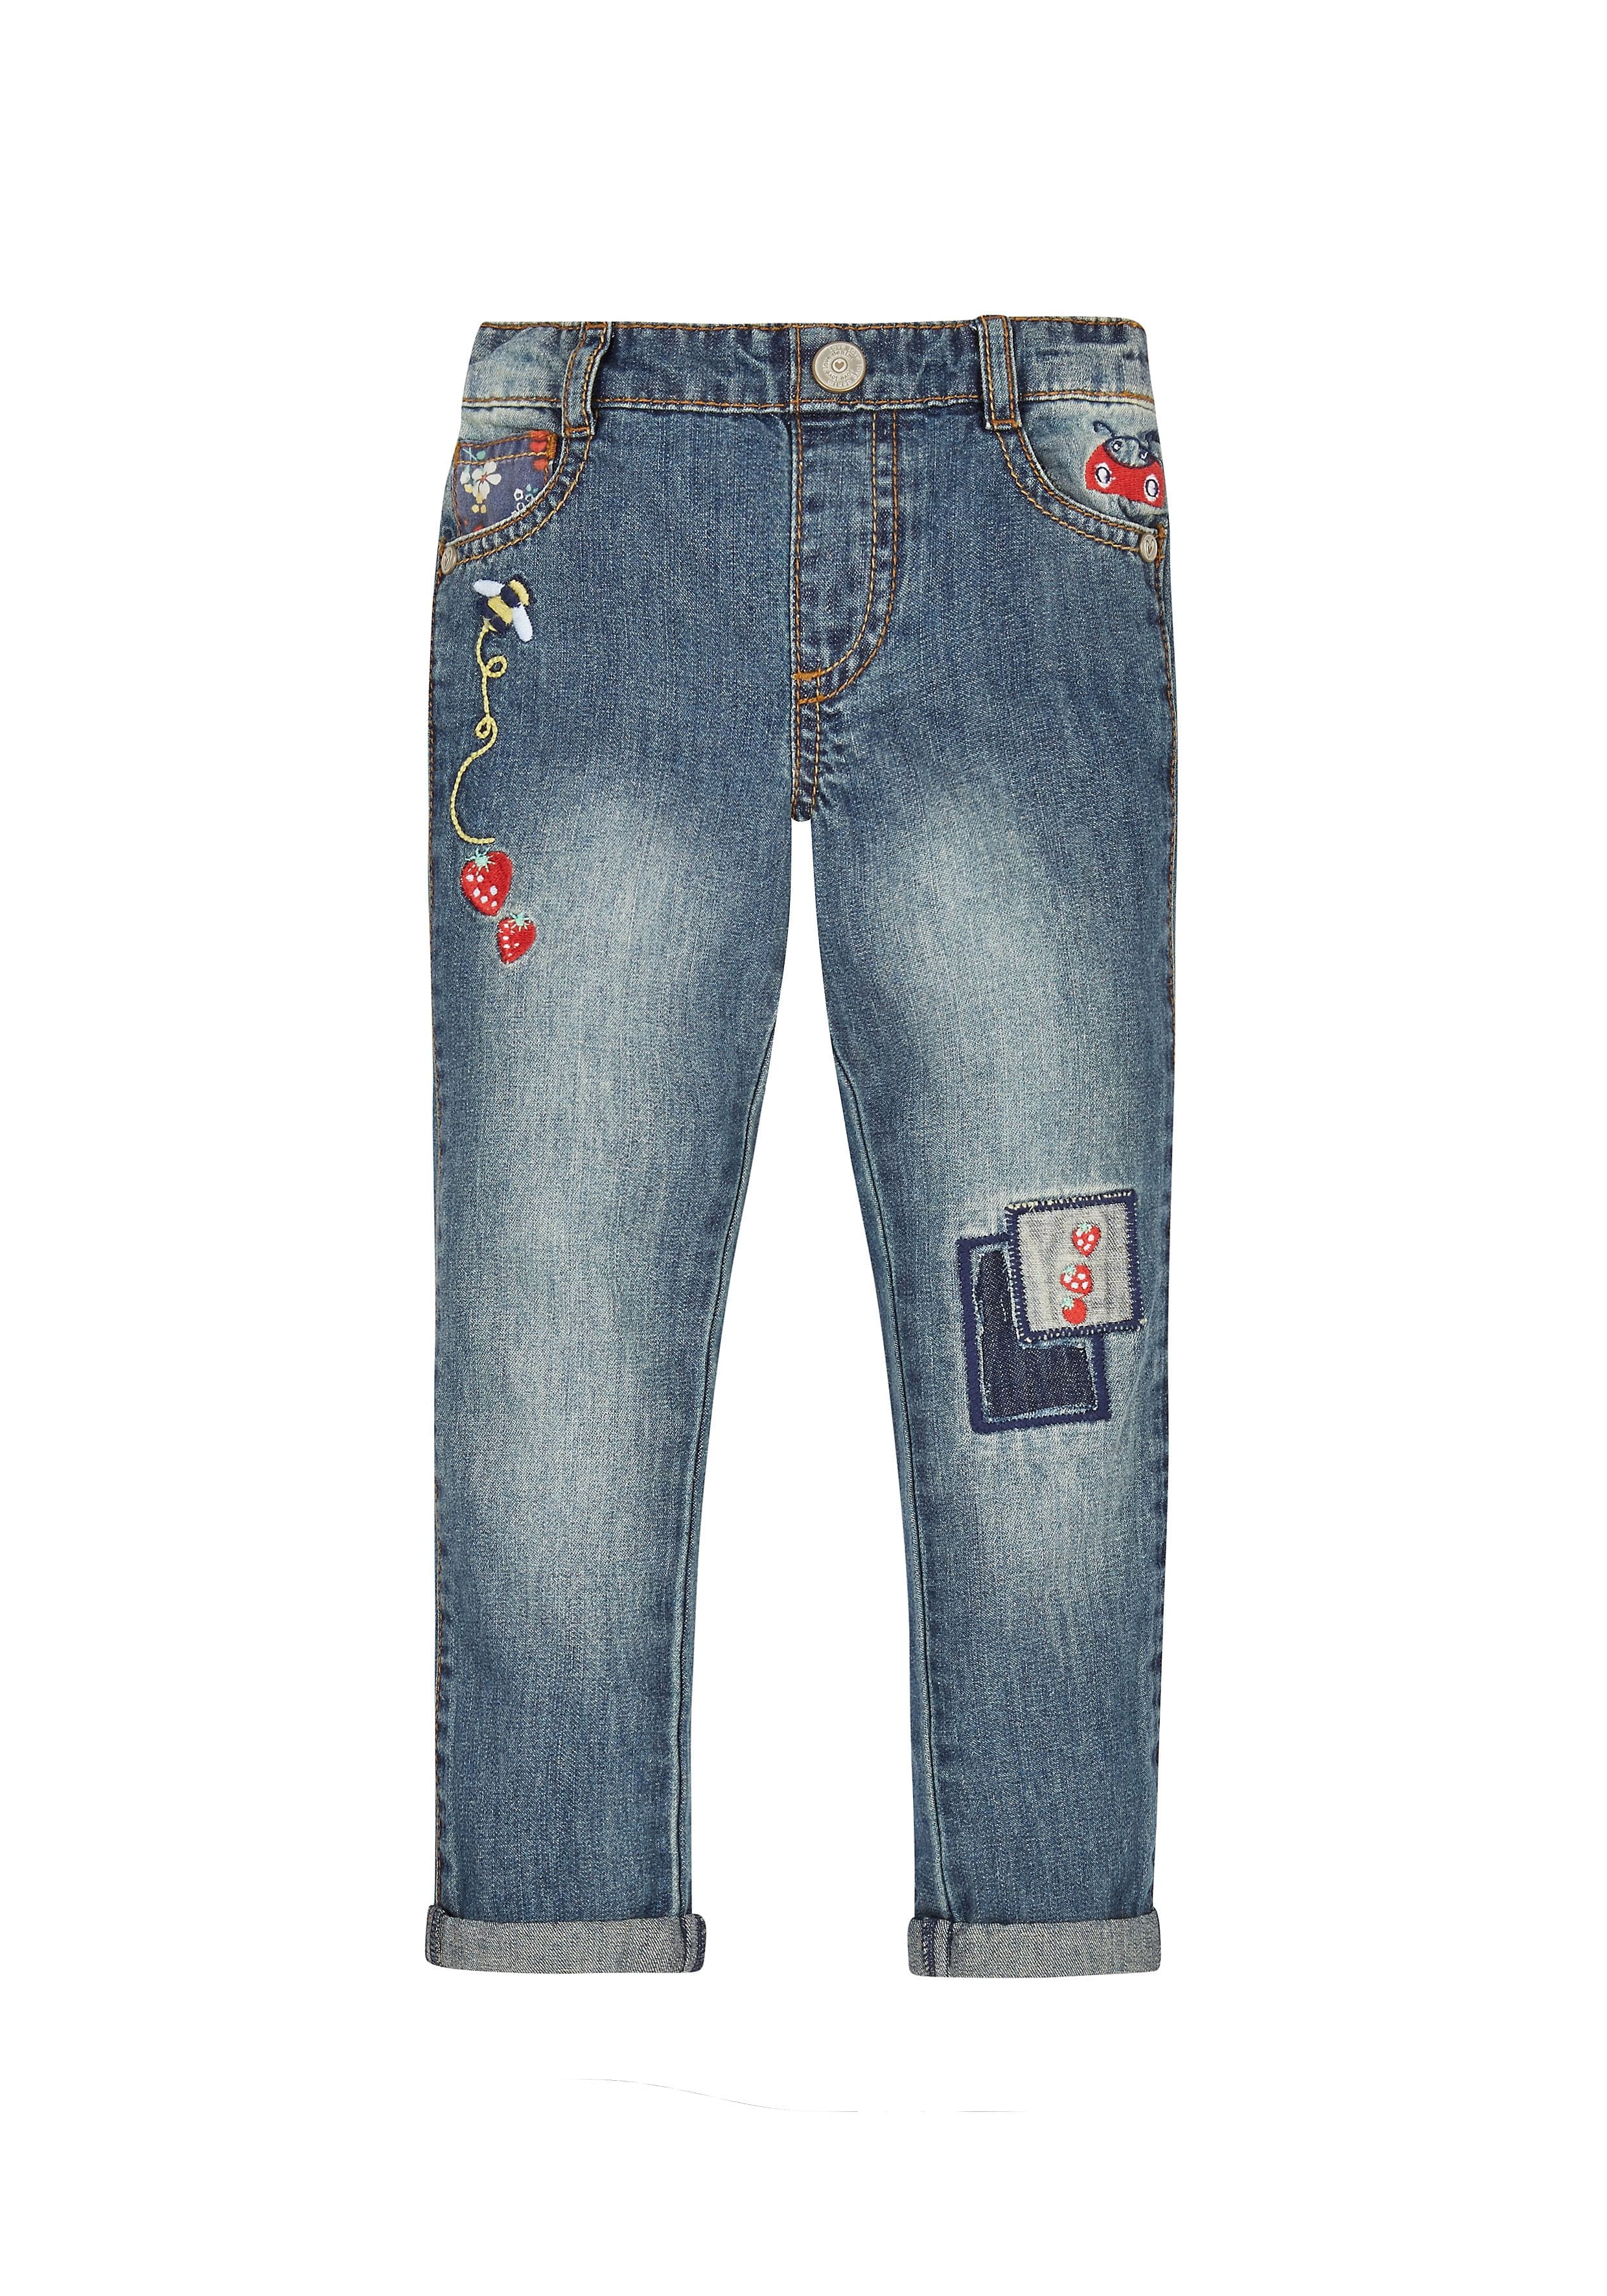 Mothercare | Girls Embroidered Jeans - Blue 0